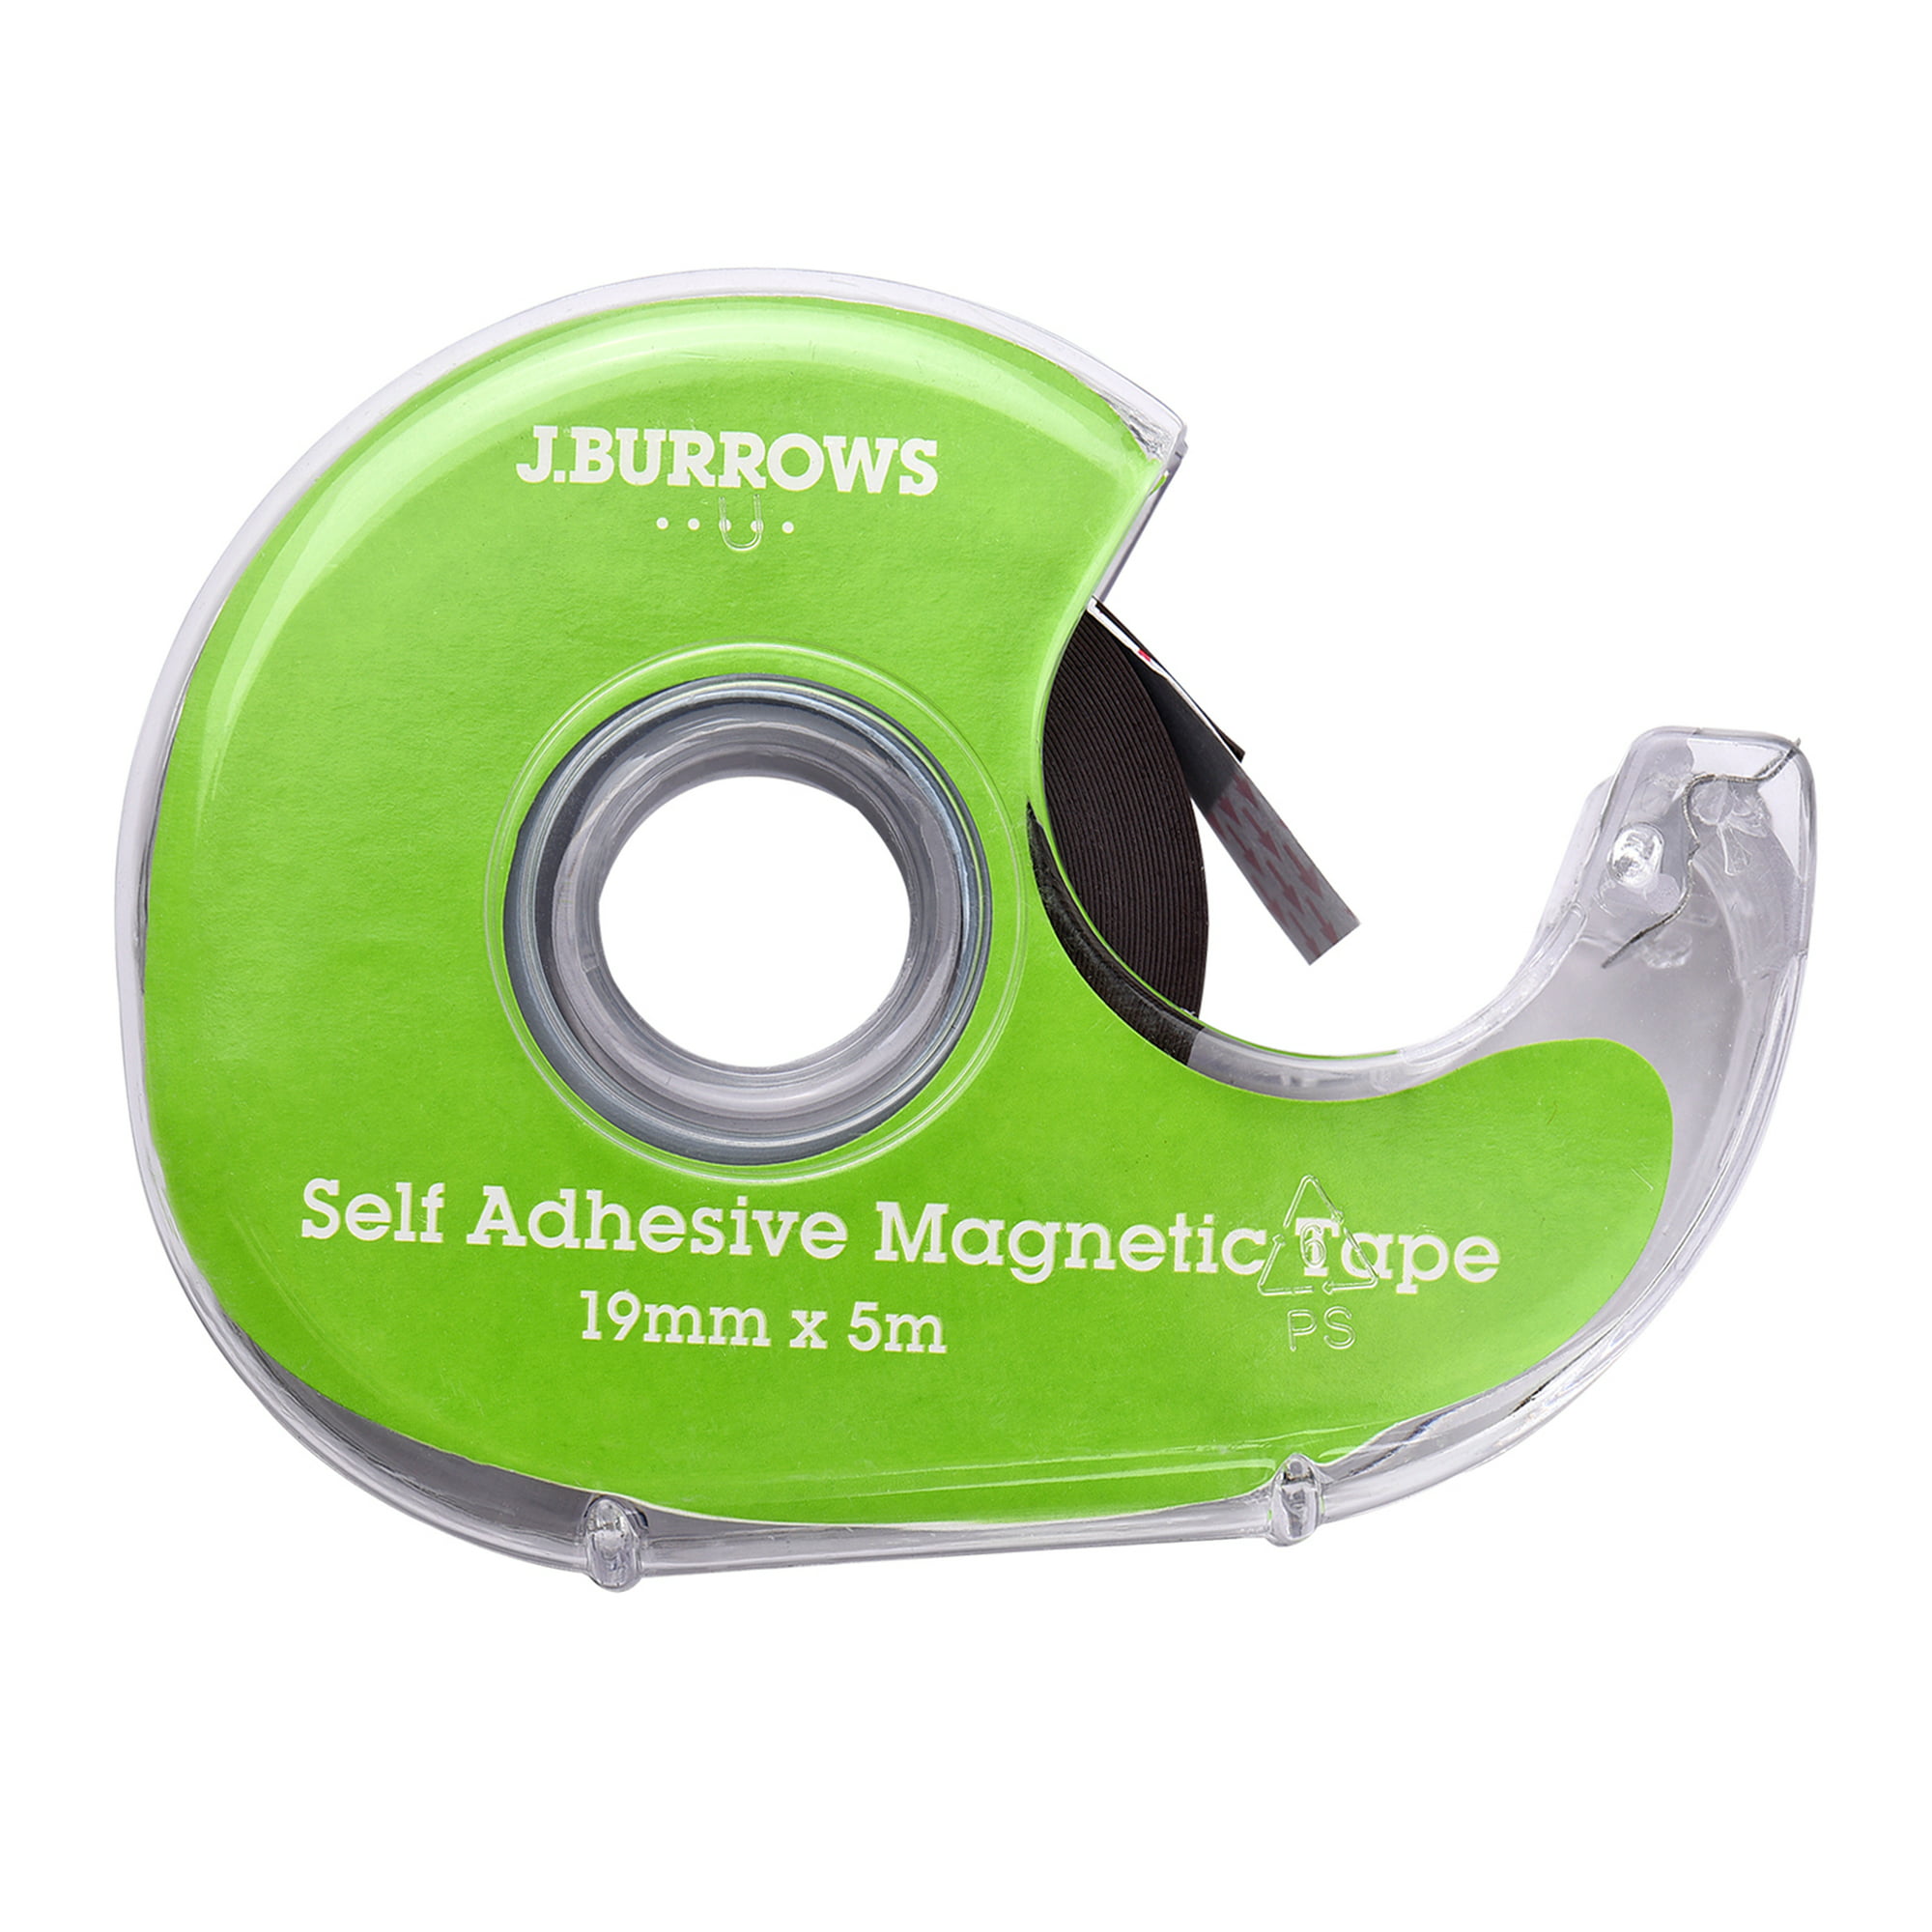  Adhesive Backing Tira magnética de goma Suave autoadhesiva, Cinta  magnética de 1 a 10 metros, 6x1, 10x1,5, 12x2, 15x2, 20x1,5mm, ancho de  10mm, 15mm y 30mm Magnetic Tape (Color 